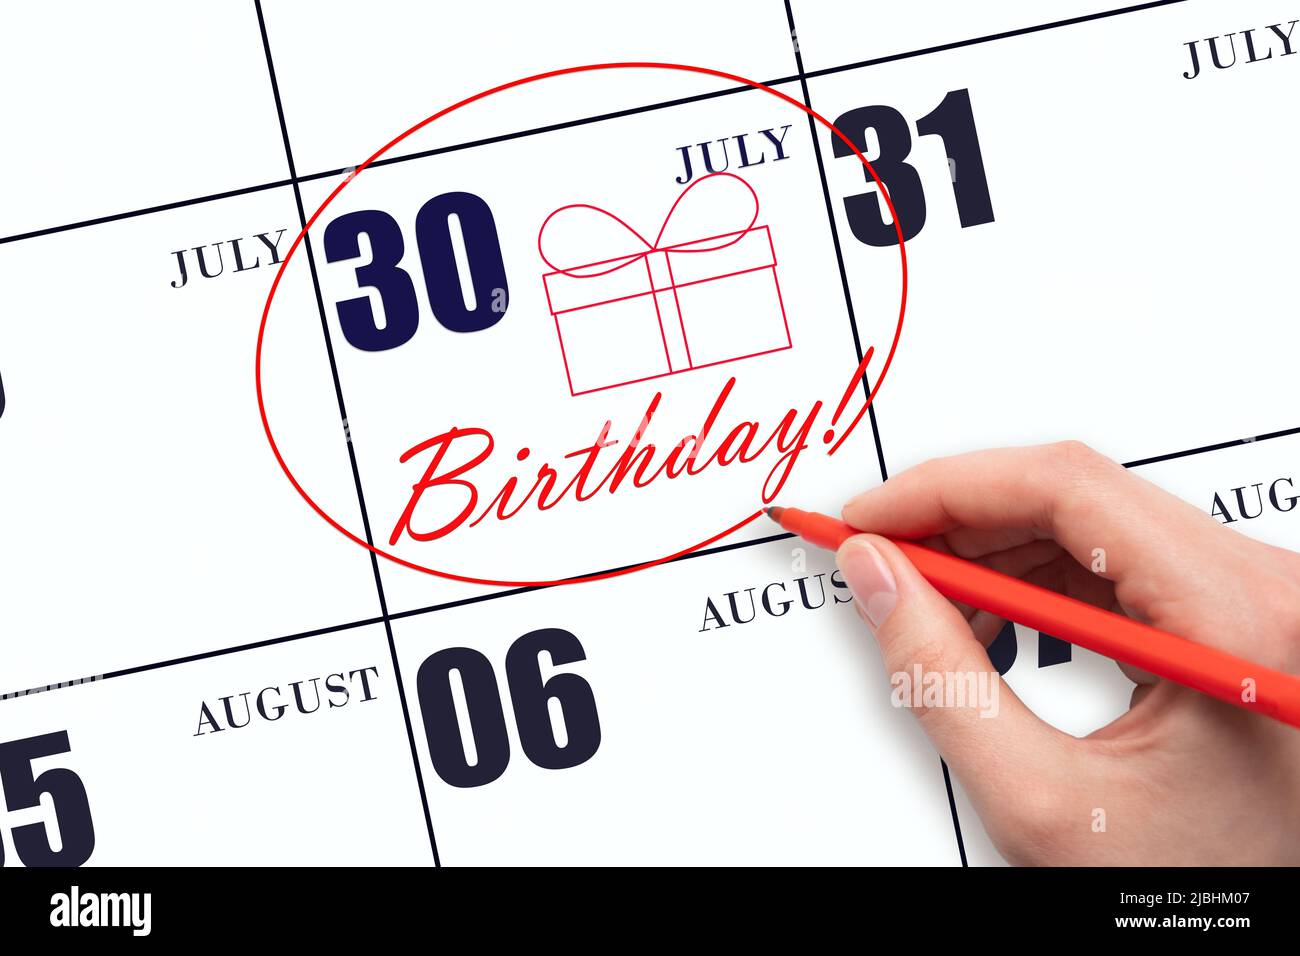 30th day ofJuly. The hand circles the date on the calendar 30July, draws a gift box and writes the text Birthday. Holiday. Summer month, day of the ye Stock Photo - Alamy